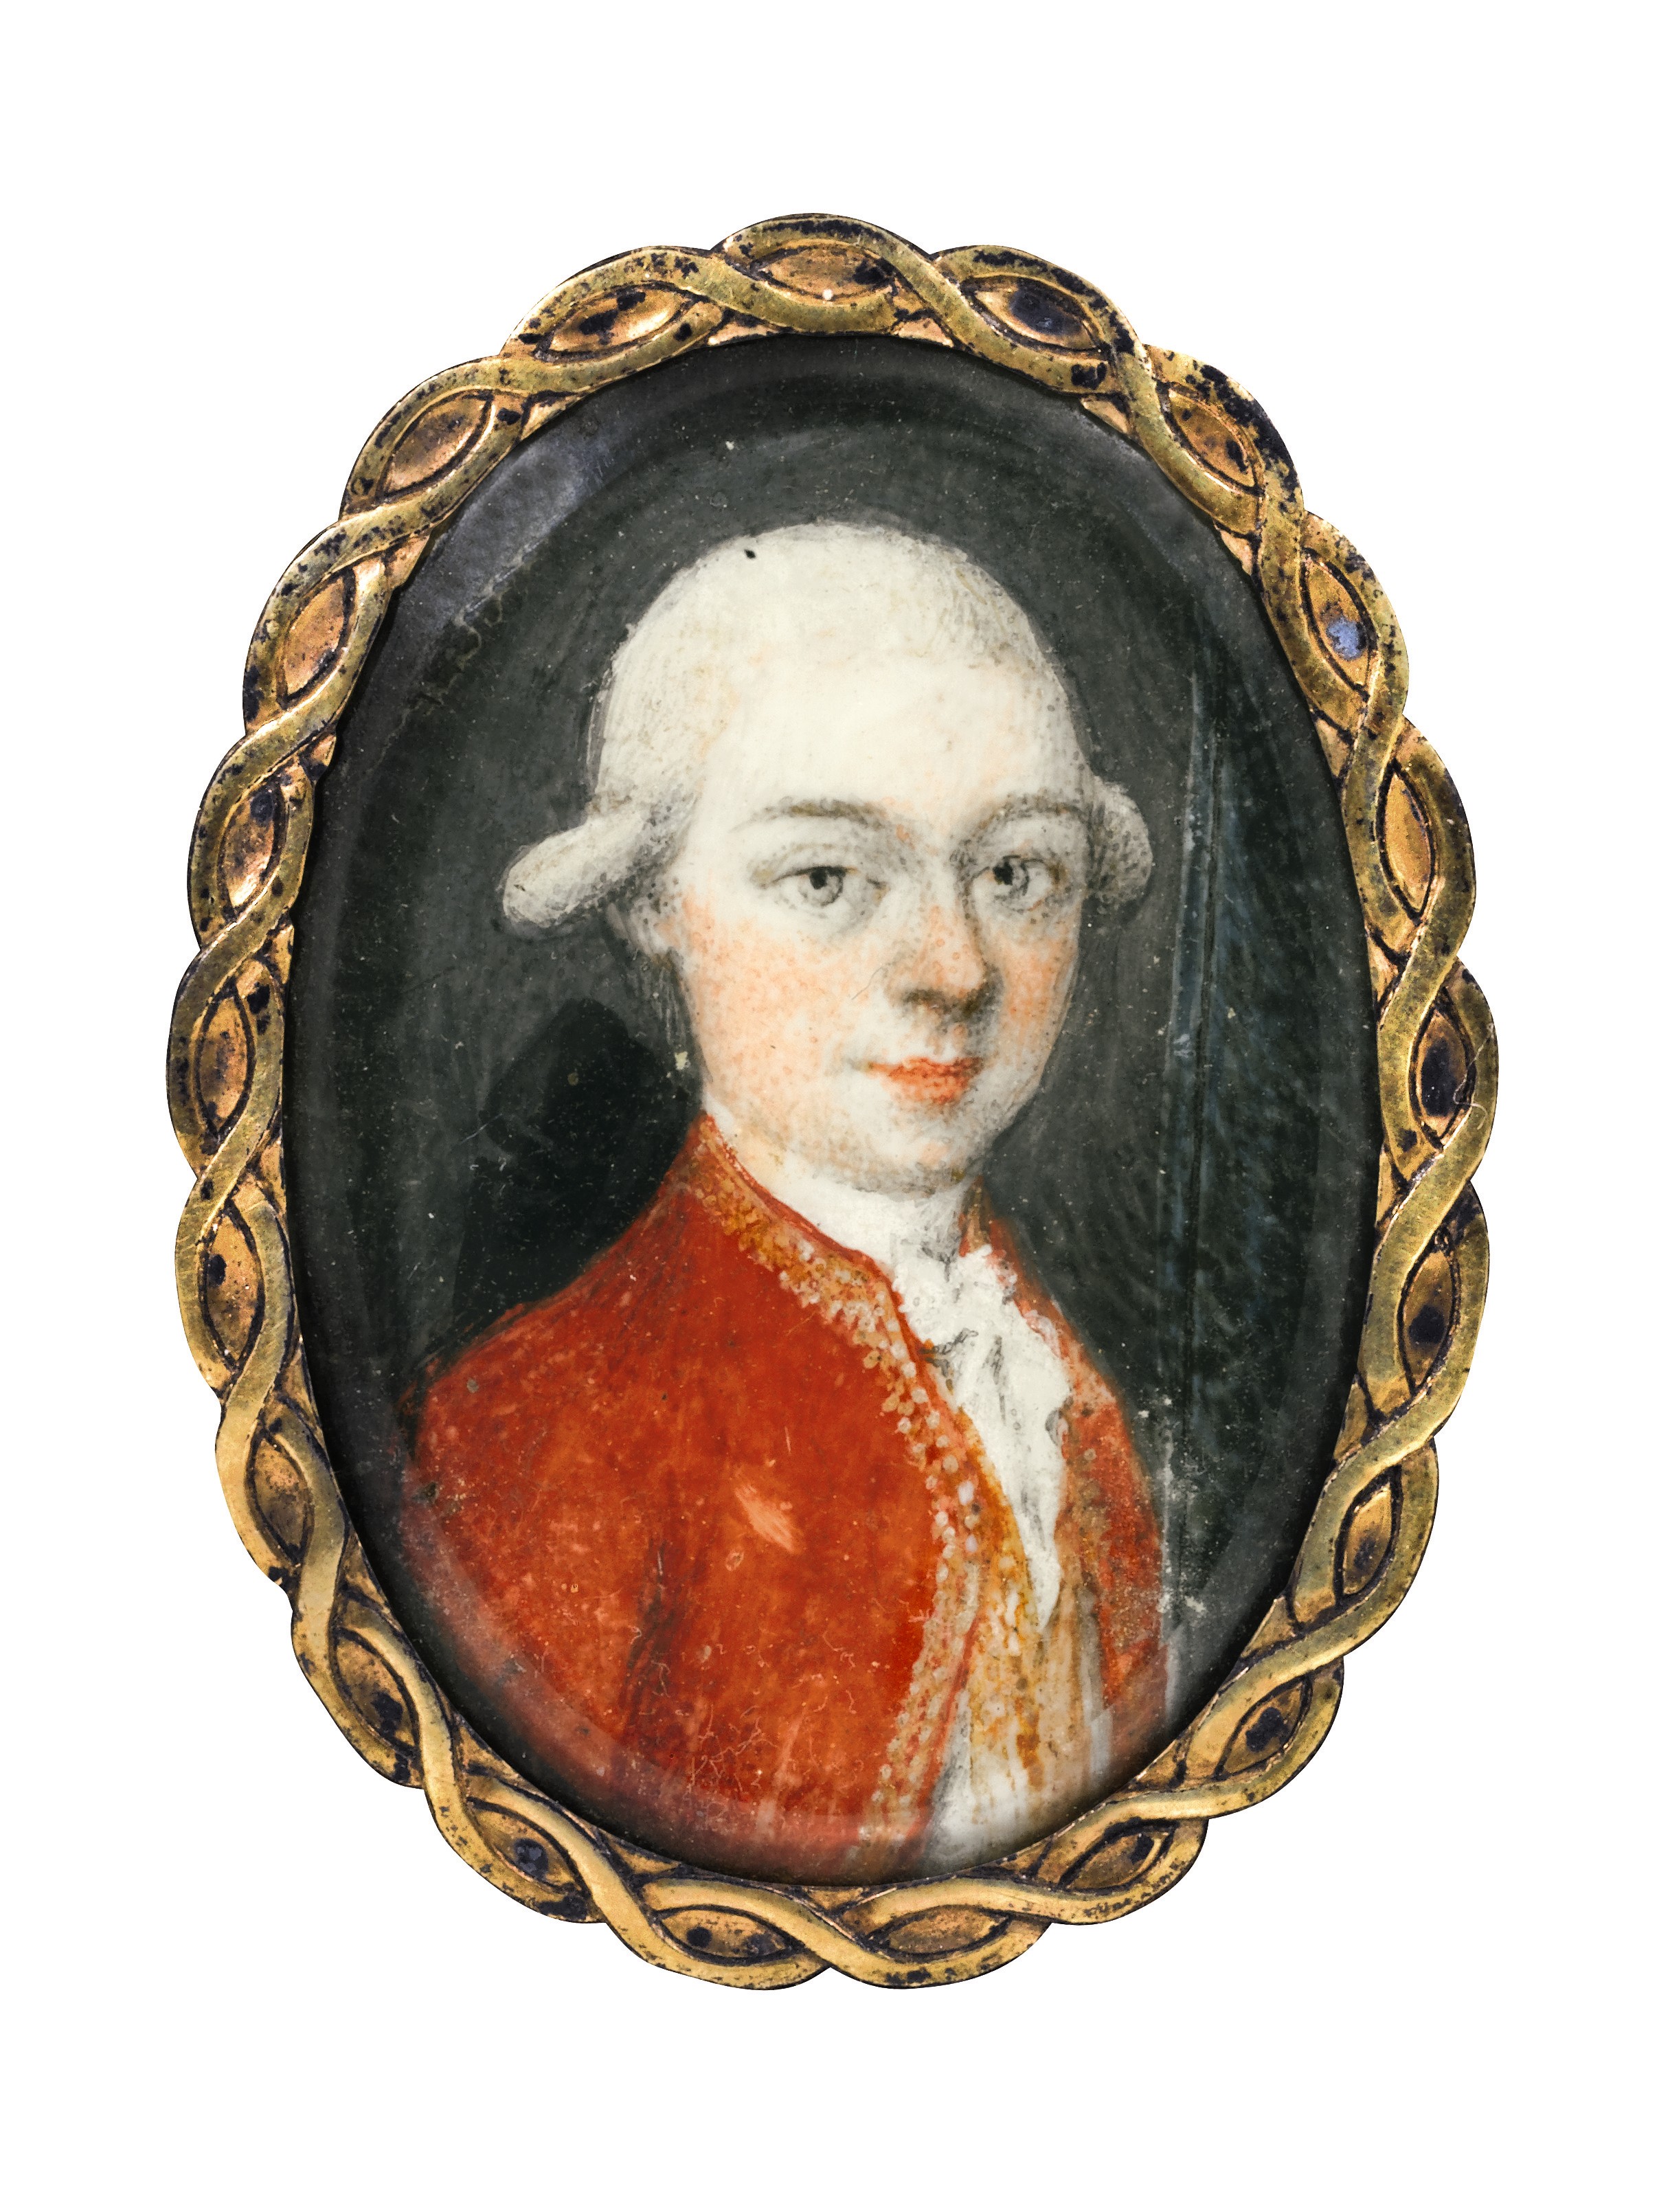 The smallest portrait of Mozart expected to fetch £200,000–£300,000 